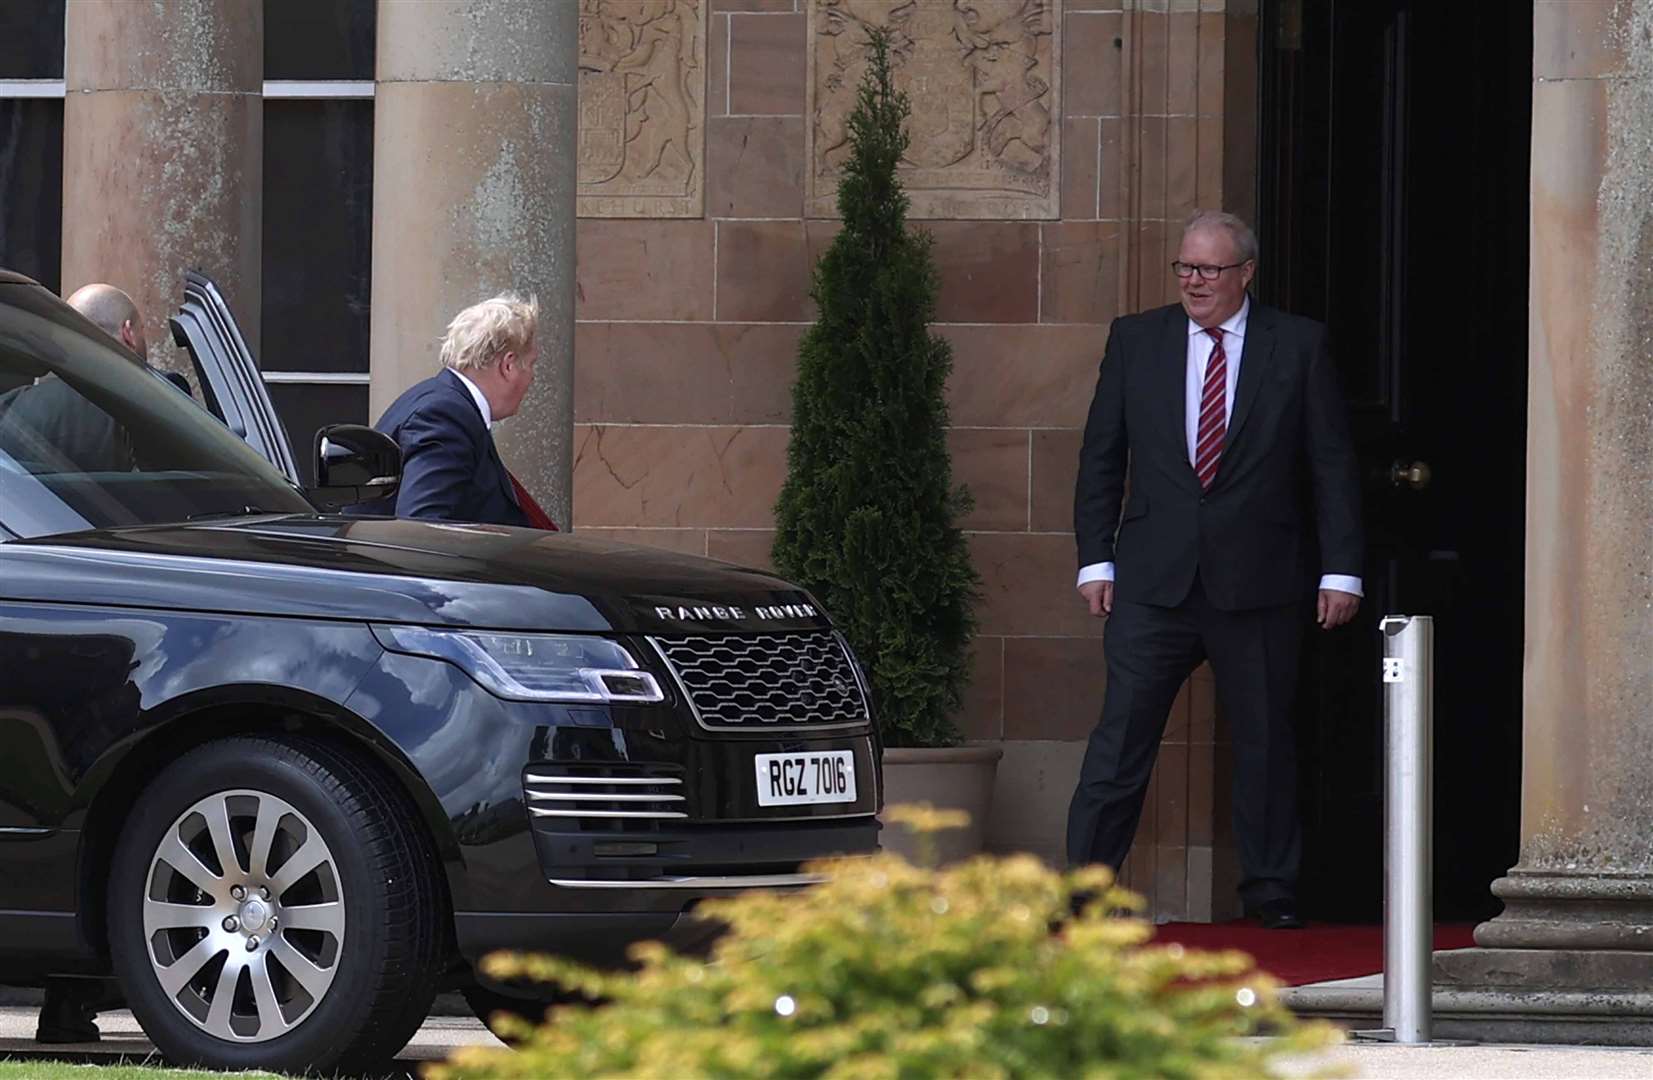 Prime Minister Boris Johnson (centre left) arrives at Hillsborough Castle during a visit to Northern Ireland for talks with Stormont parties. (Liam McBurney/PA)